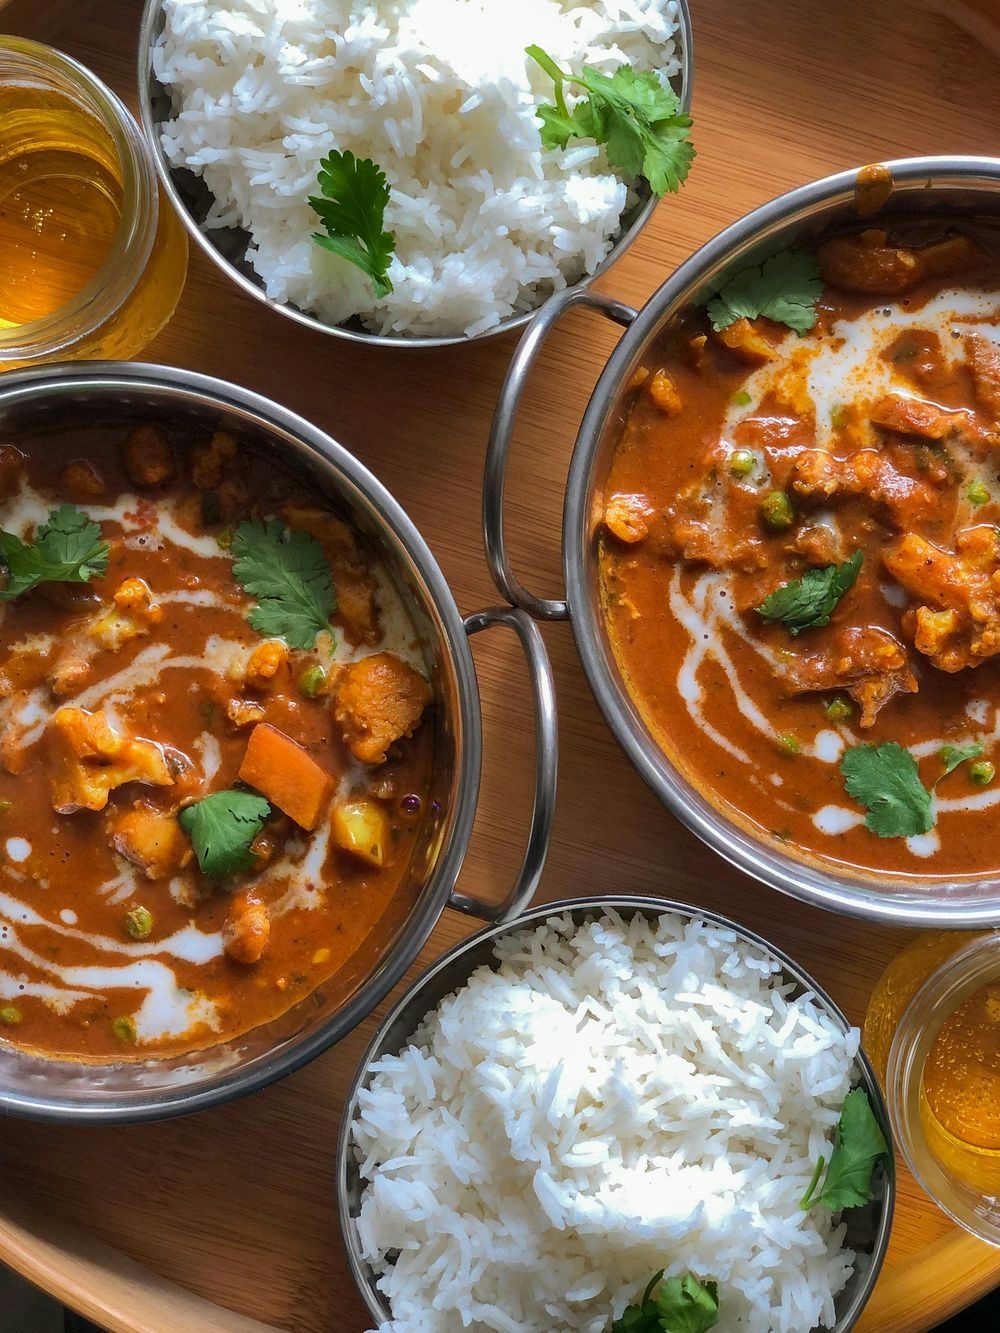 A Beginner’s Guide to Cooking Indian Food